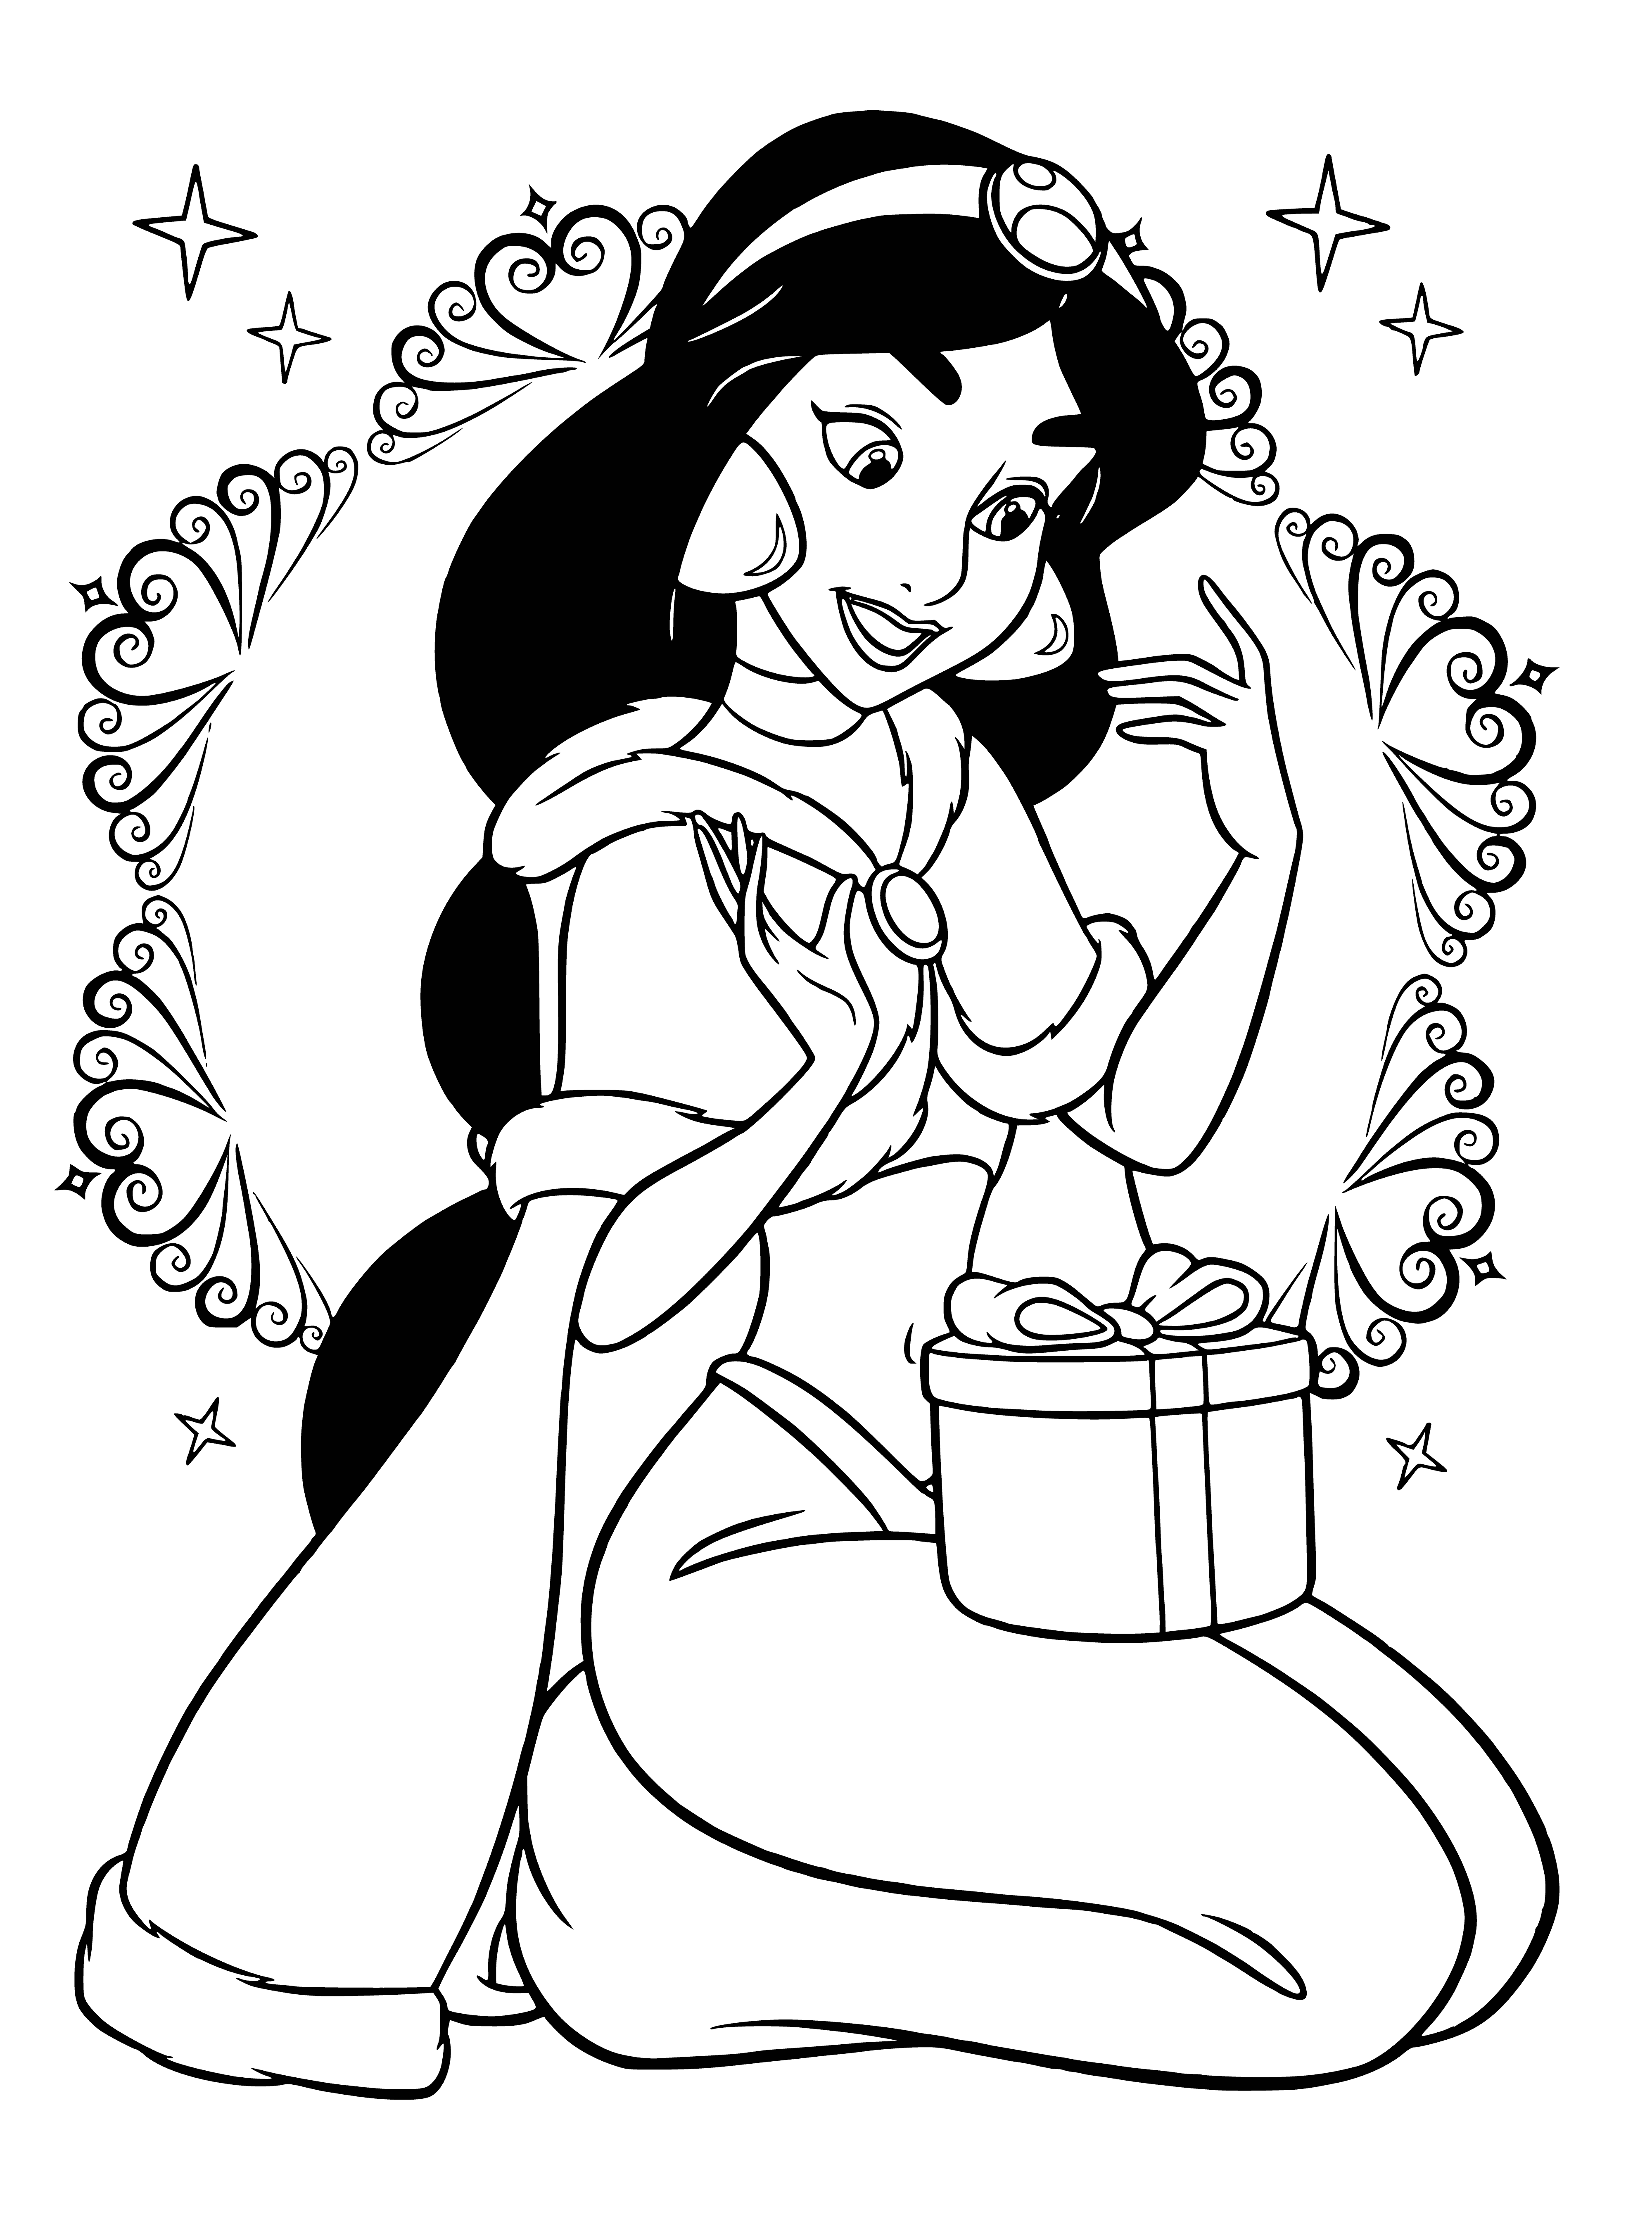 coloring page: Disney princesses are celebrating New Year, Jasmine has a gift & everyone is smiling.